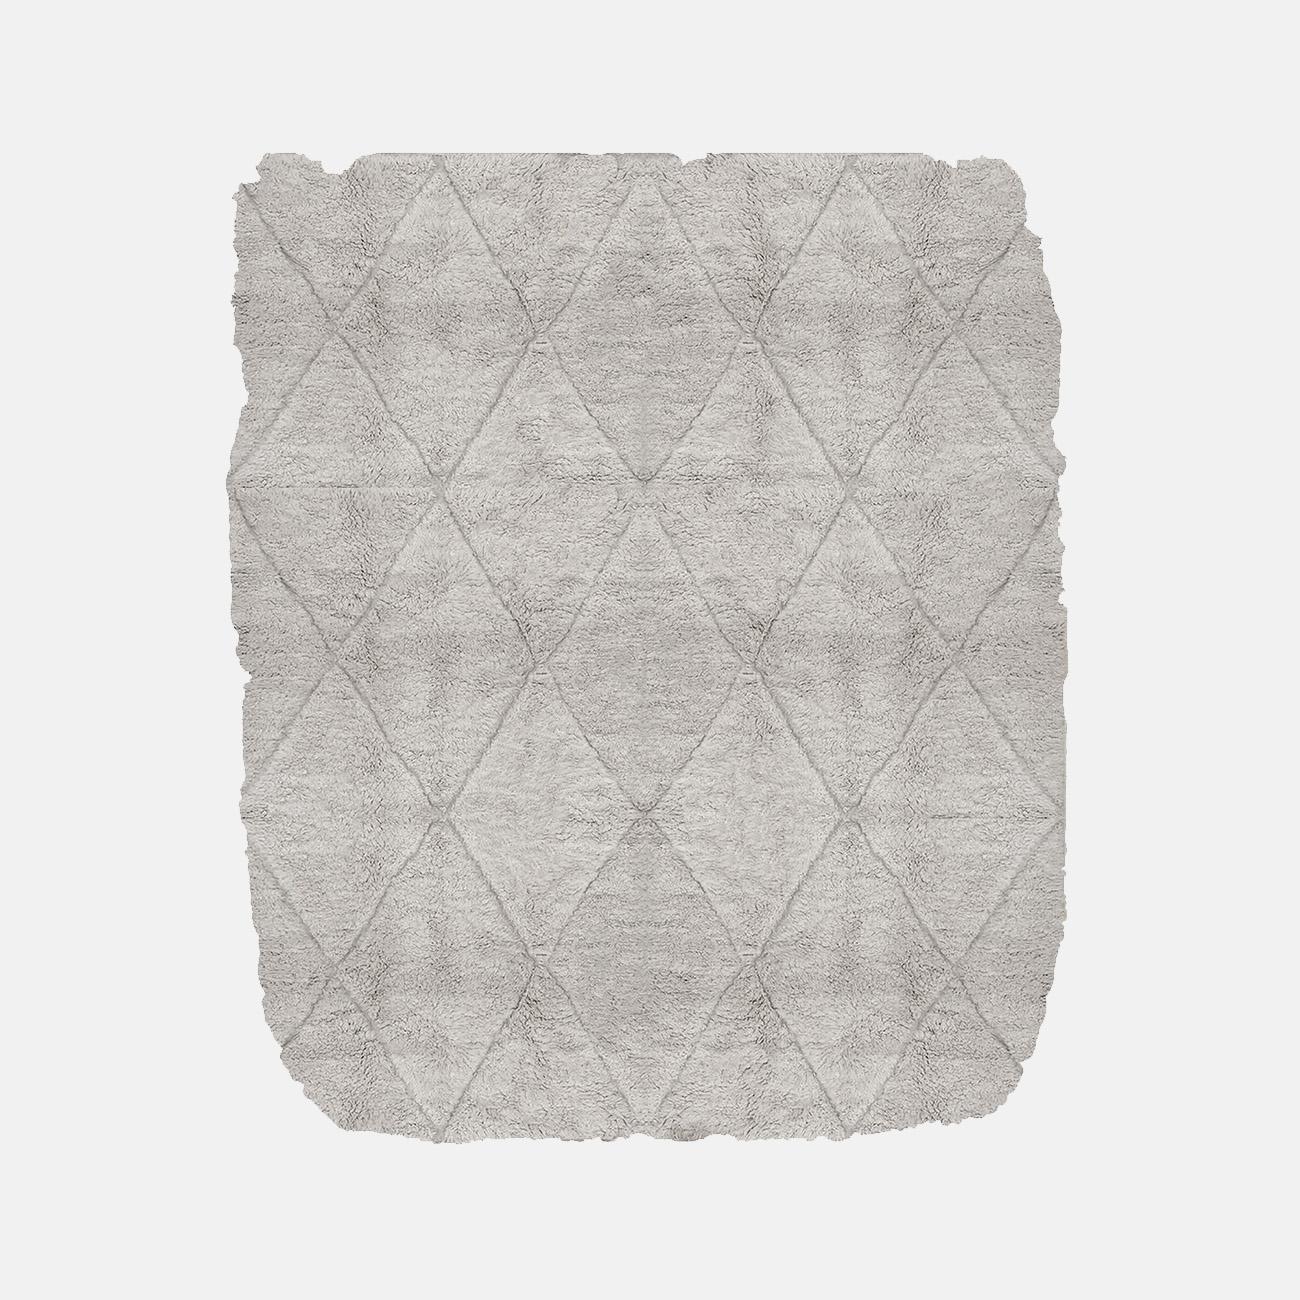 Biondi Di Abola Vigne Rug by Atelier Bowy C.D.
Dimensions: W 243 x L 350 cm.
Materials: Wool.

Available in W140 x L220, W170 x L240, W210 x L300, W230 x L300, W243 x L350 cm.

Atelier Bowy C.D. is dedicated to crafting contemporary handmade rugs